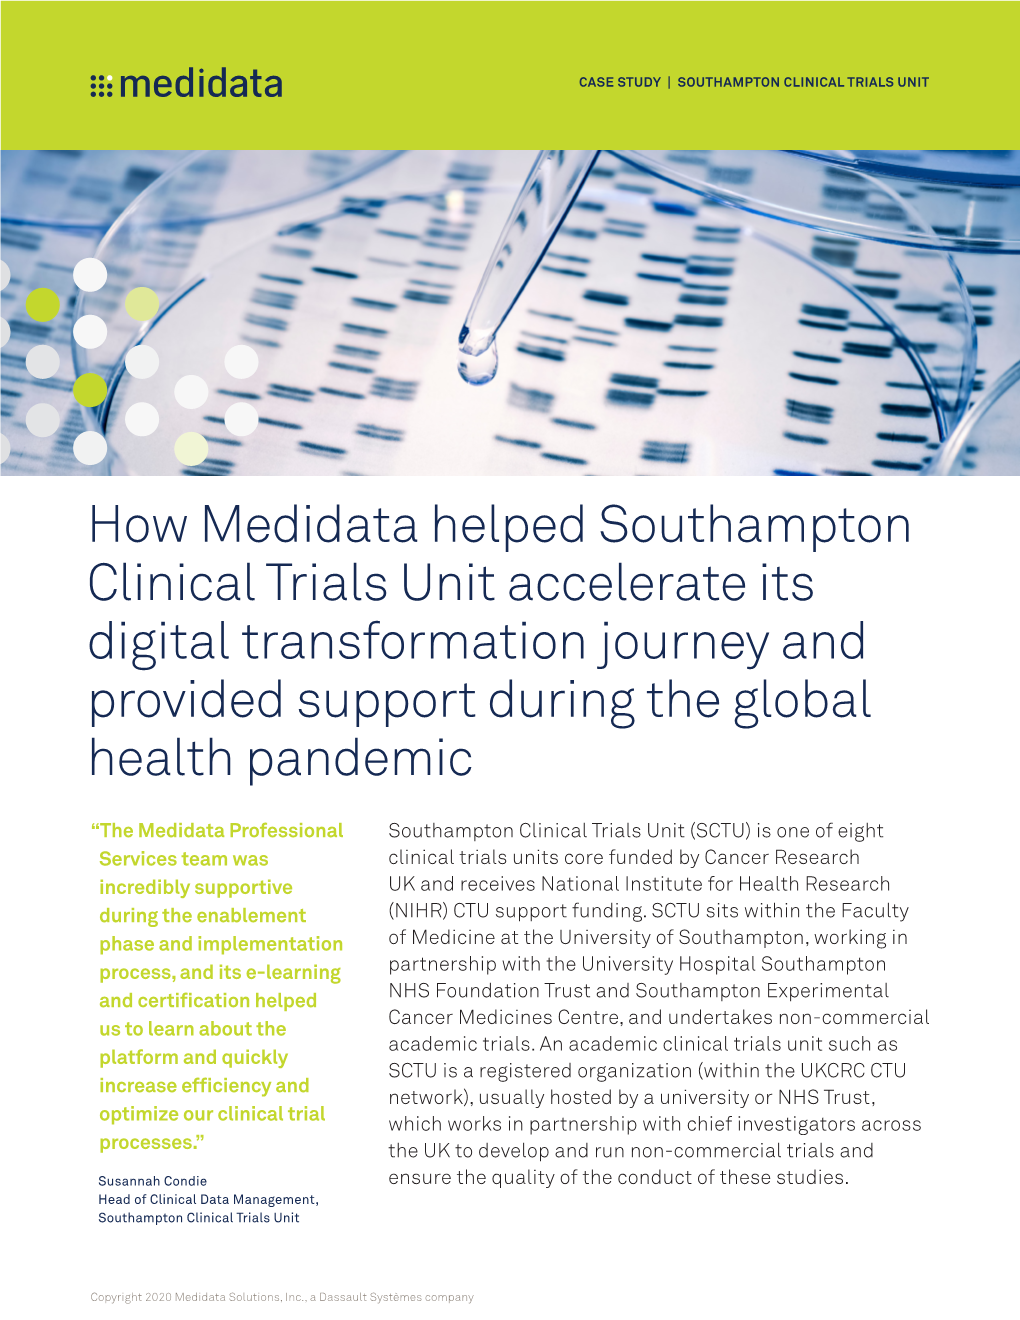 How Medidata Helped Southampton Clinical Trials Unit Accelerate Its Digital Transformation Journey and Provided Support During the Global Health Pandemic